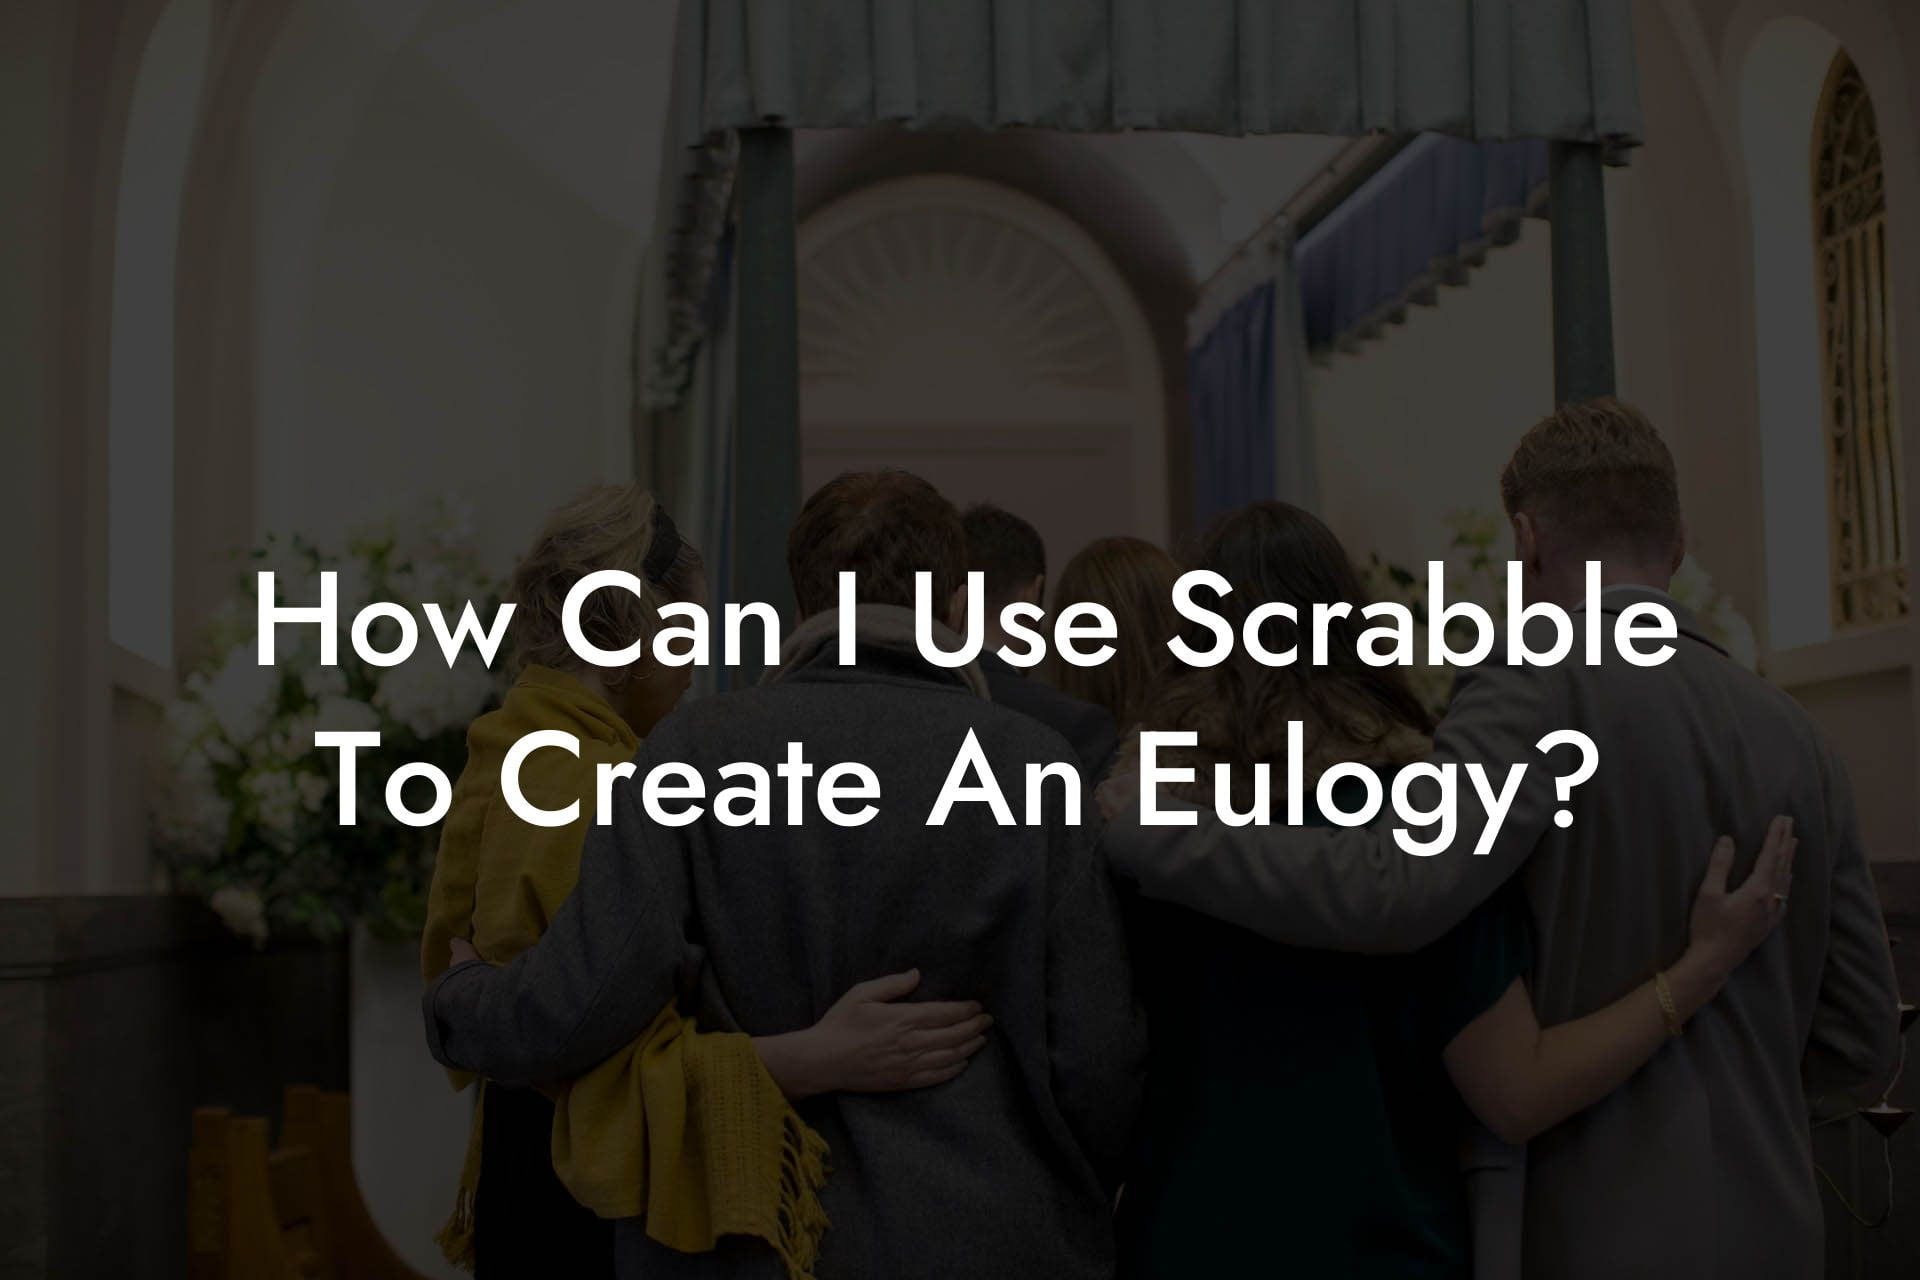 How Can I Use Scrabble To Create An Eulogy?